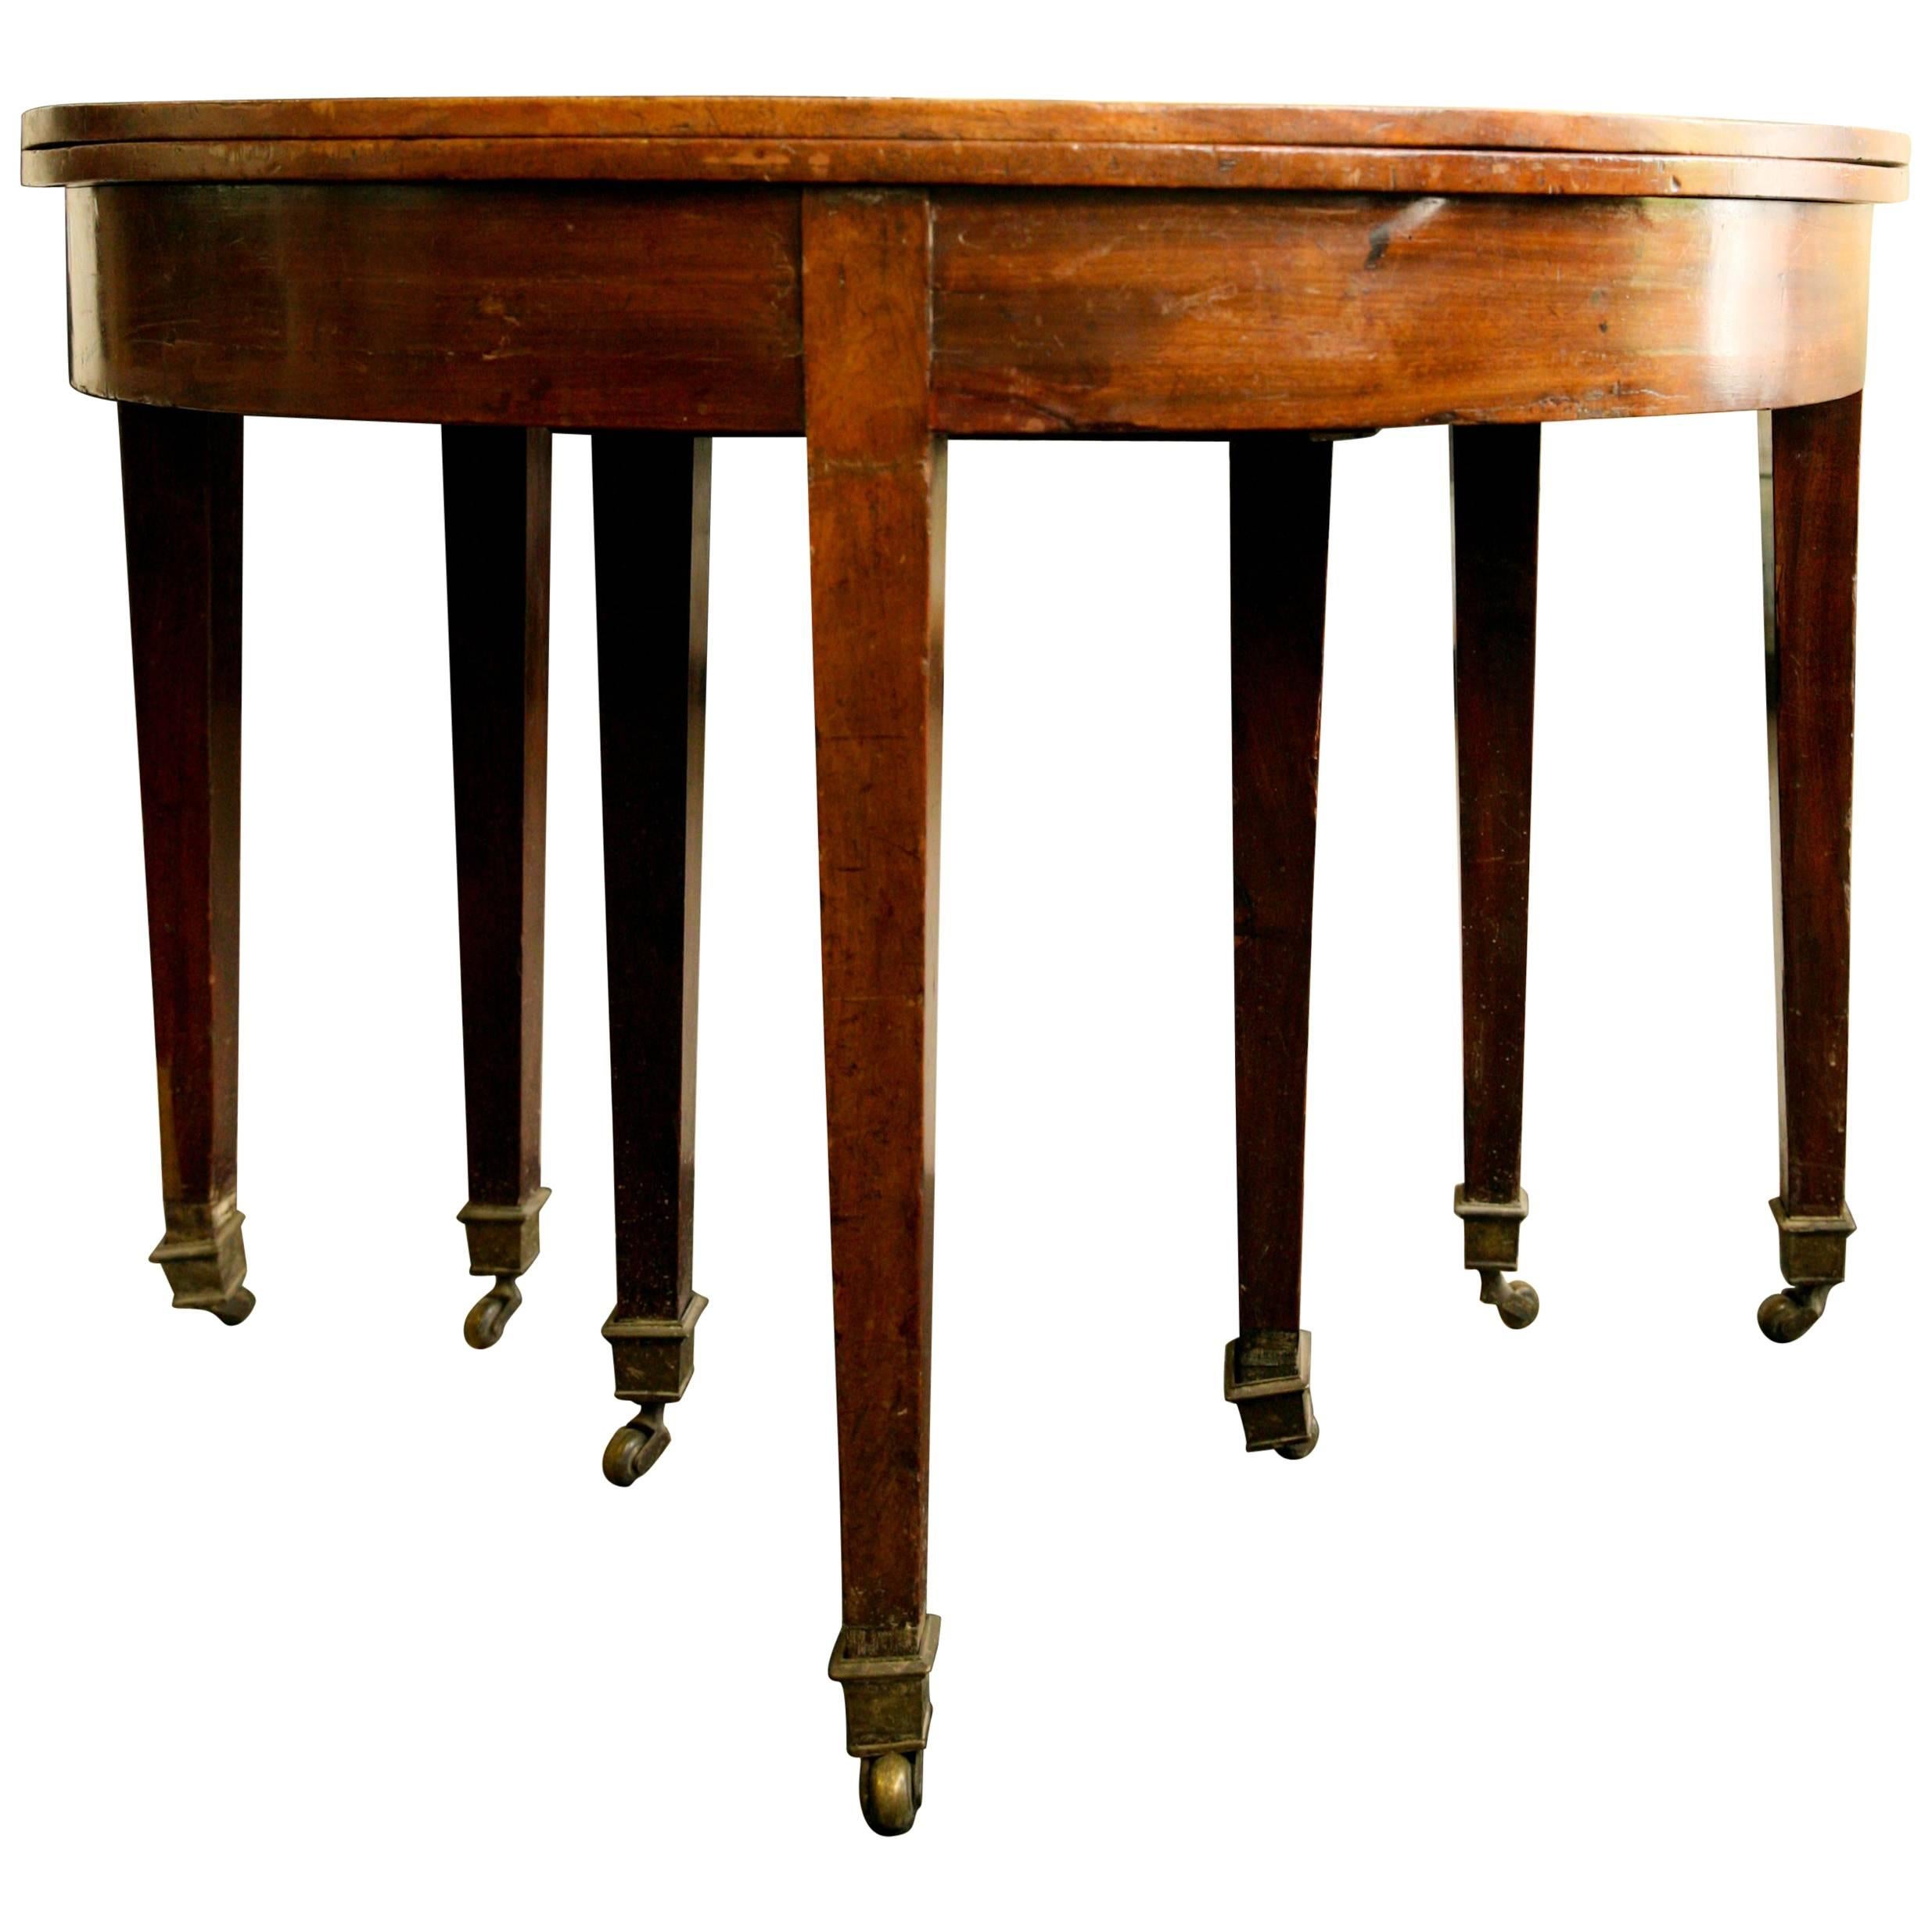 19th Century French Mahogany Folding Demilune Console Table with Hidden Drawer For Sale